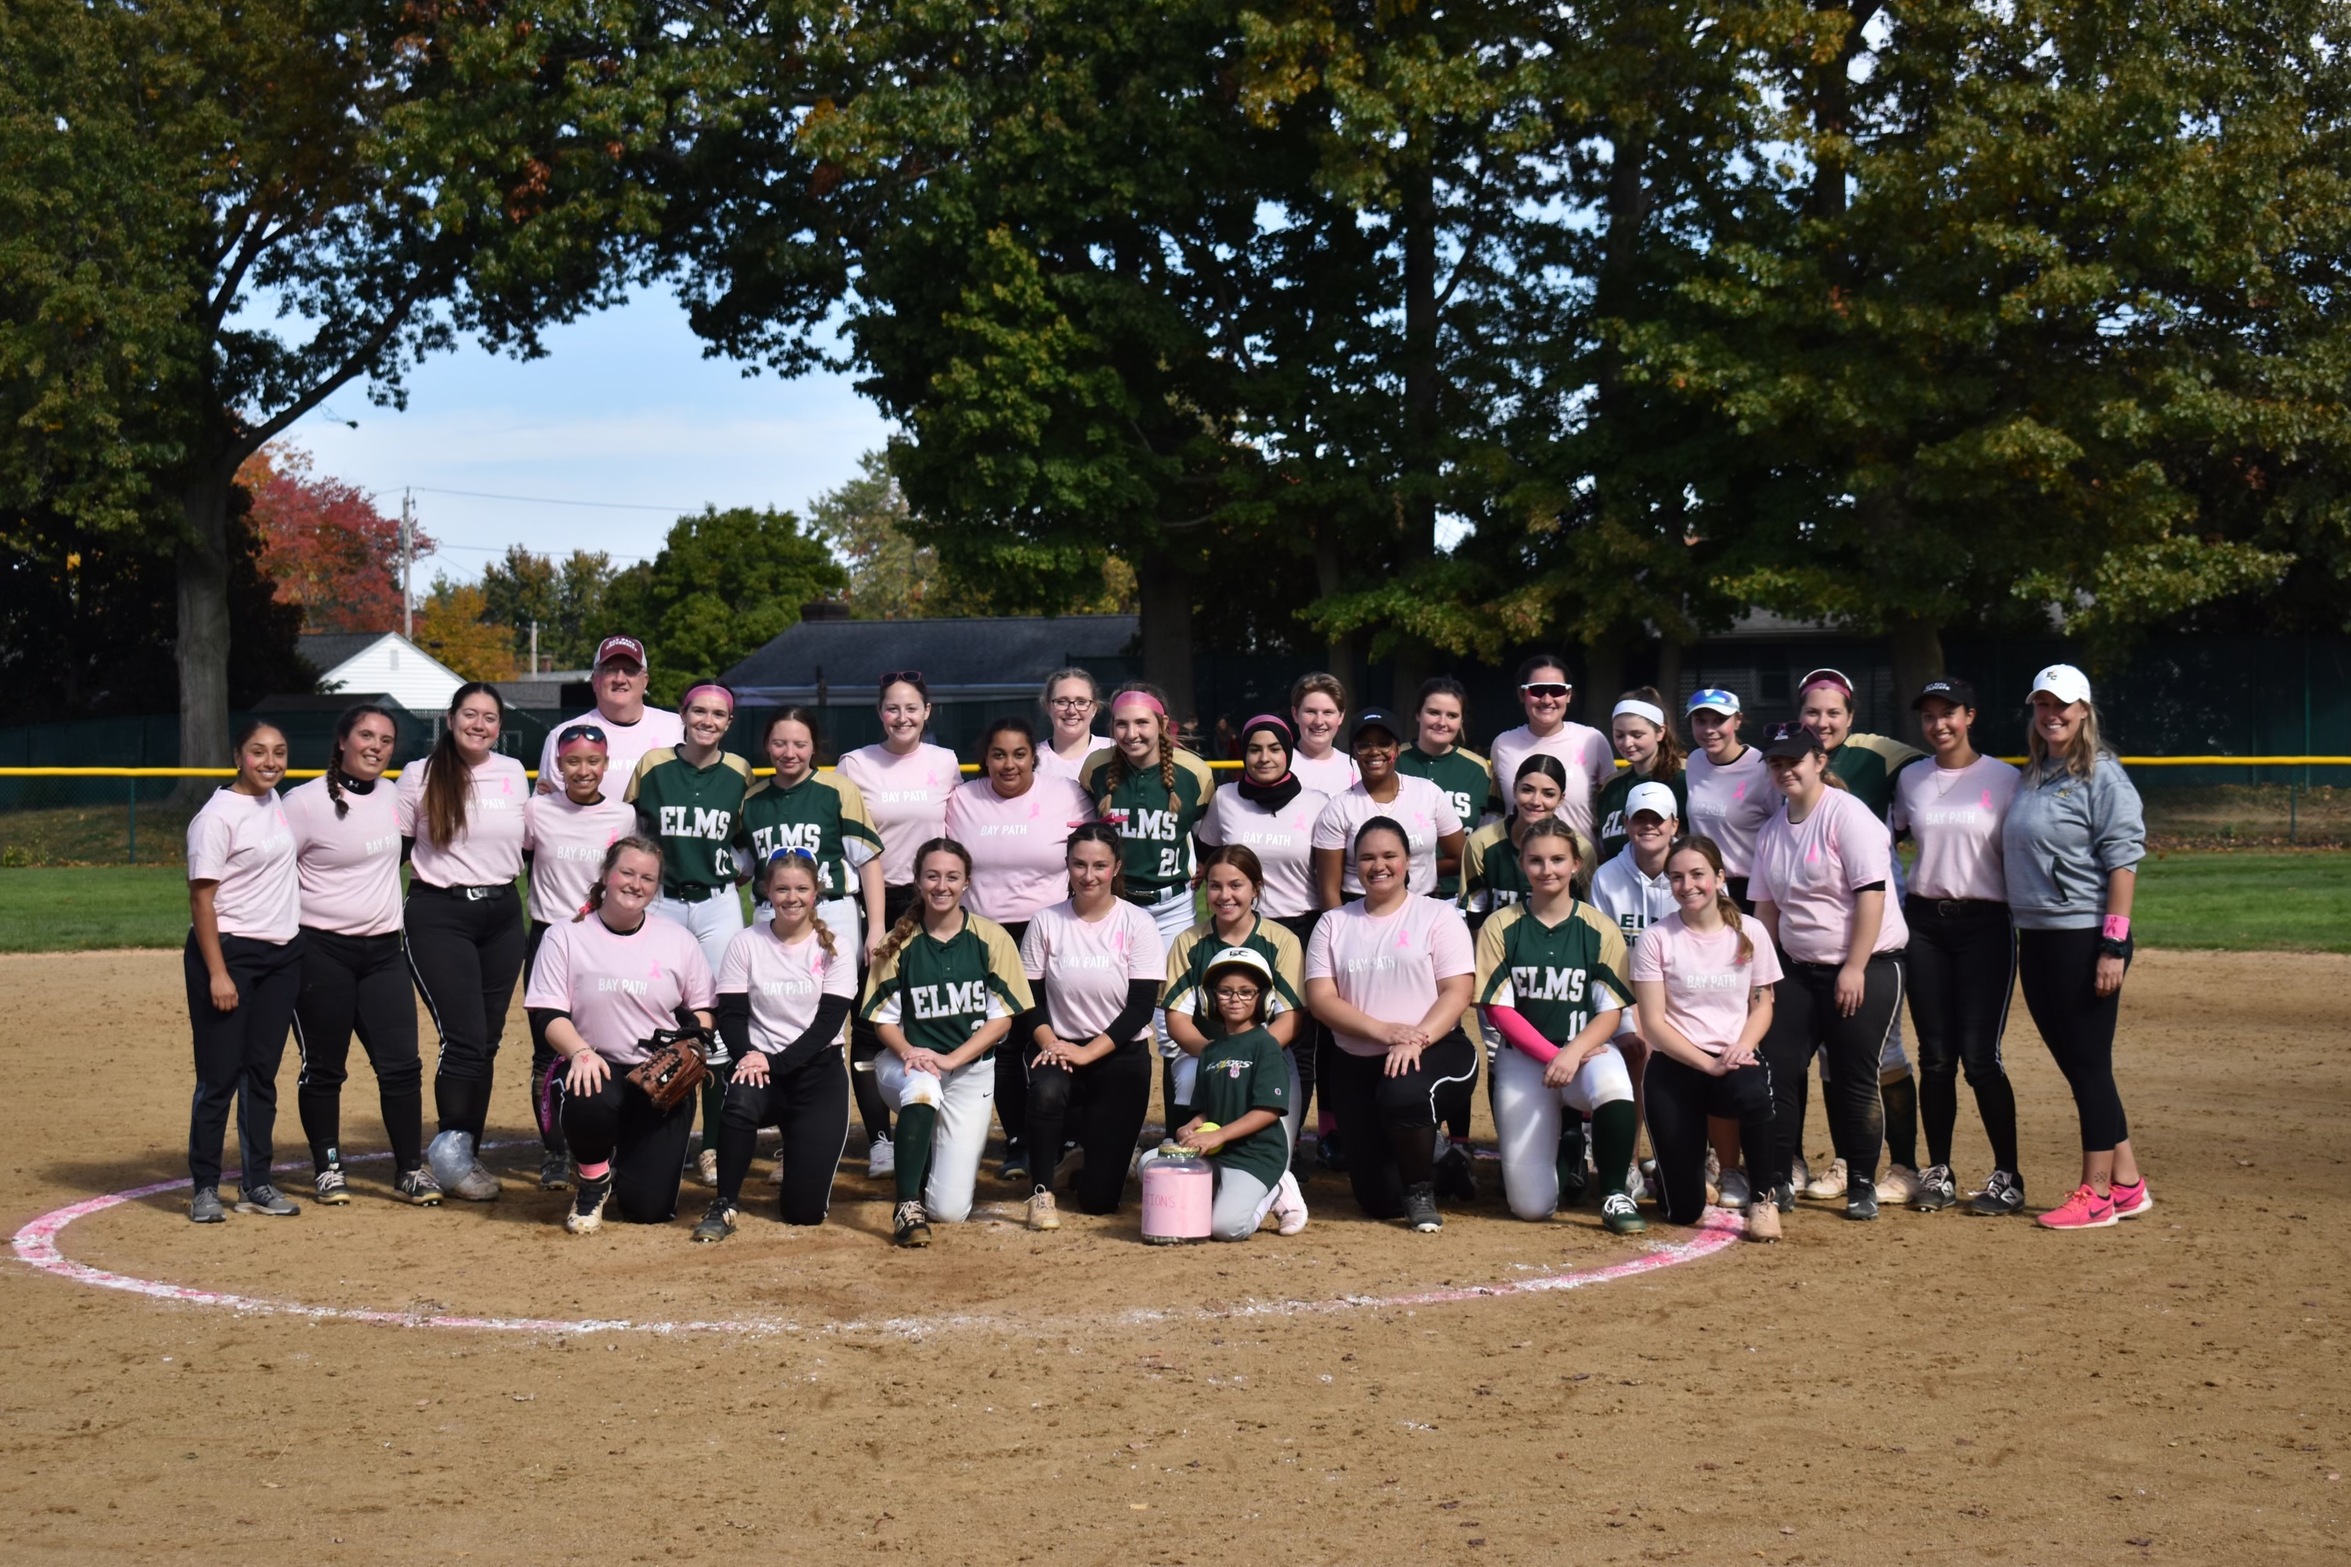 Bay Path University Softball Wraps Up with "Pink Out Day Game"